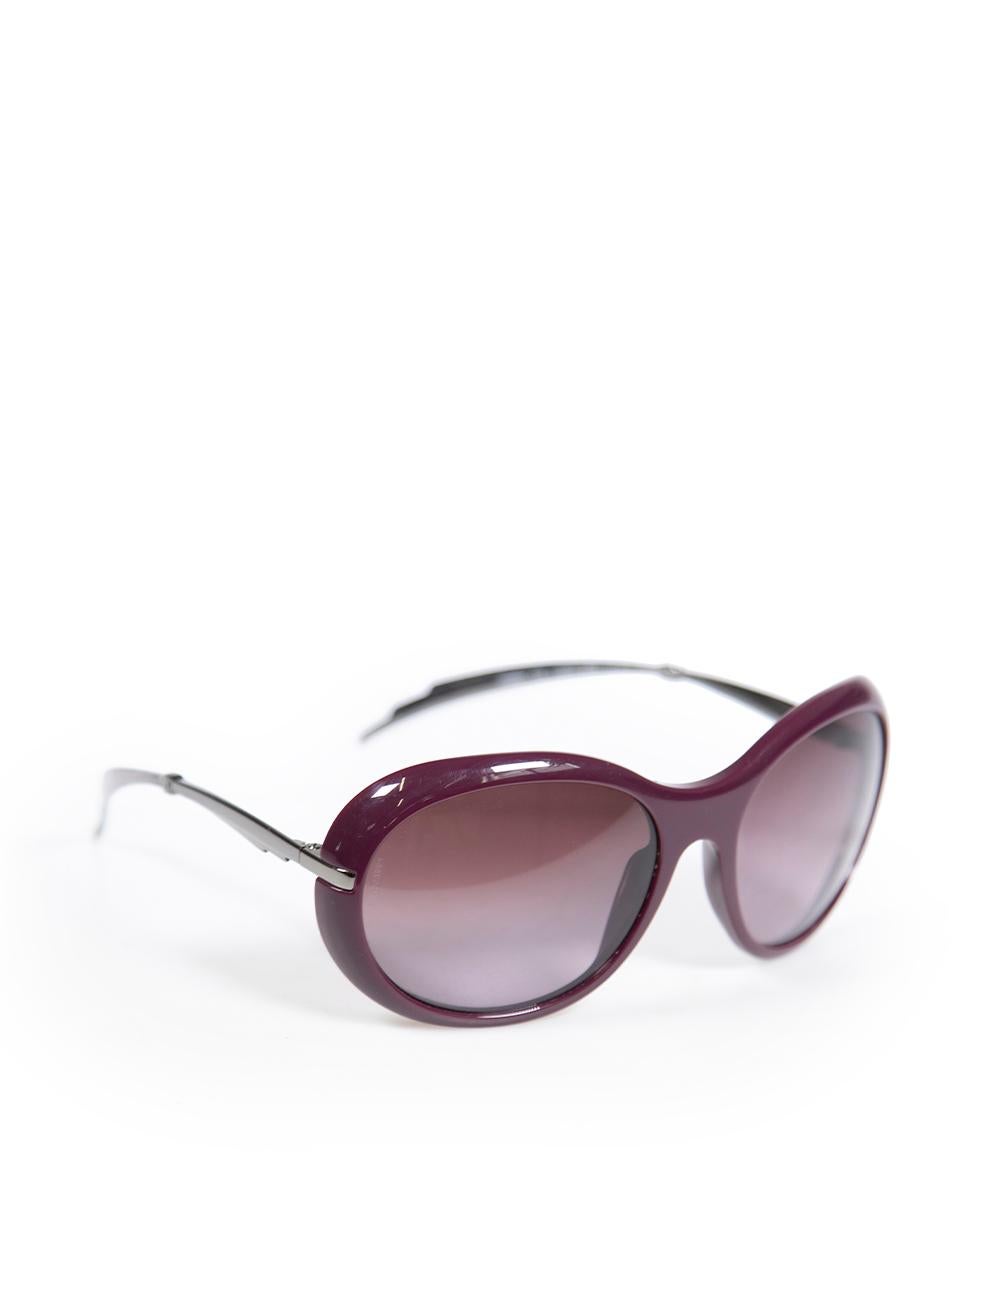 CONDITION is Very good. Minimal wear to sunglasses is evident. Minimal wear to the frame with very light scratches on this used Chanel designer resale item.
 
 
 
 Details
 
 
 C1068/3L model
 
 Purple
 
 Plastic
 
 Oversized round sunglasses
 
